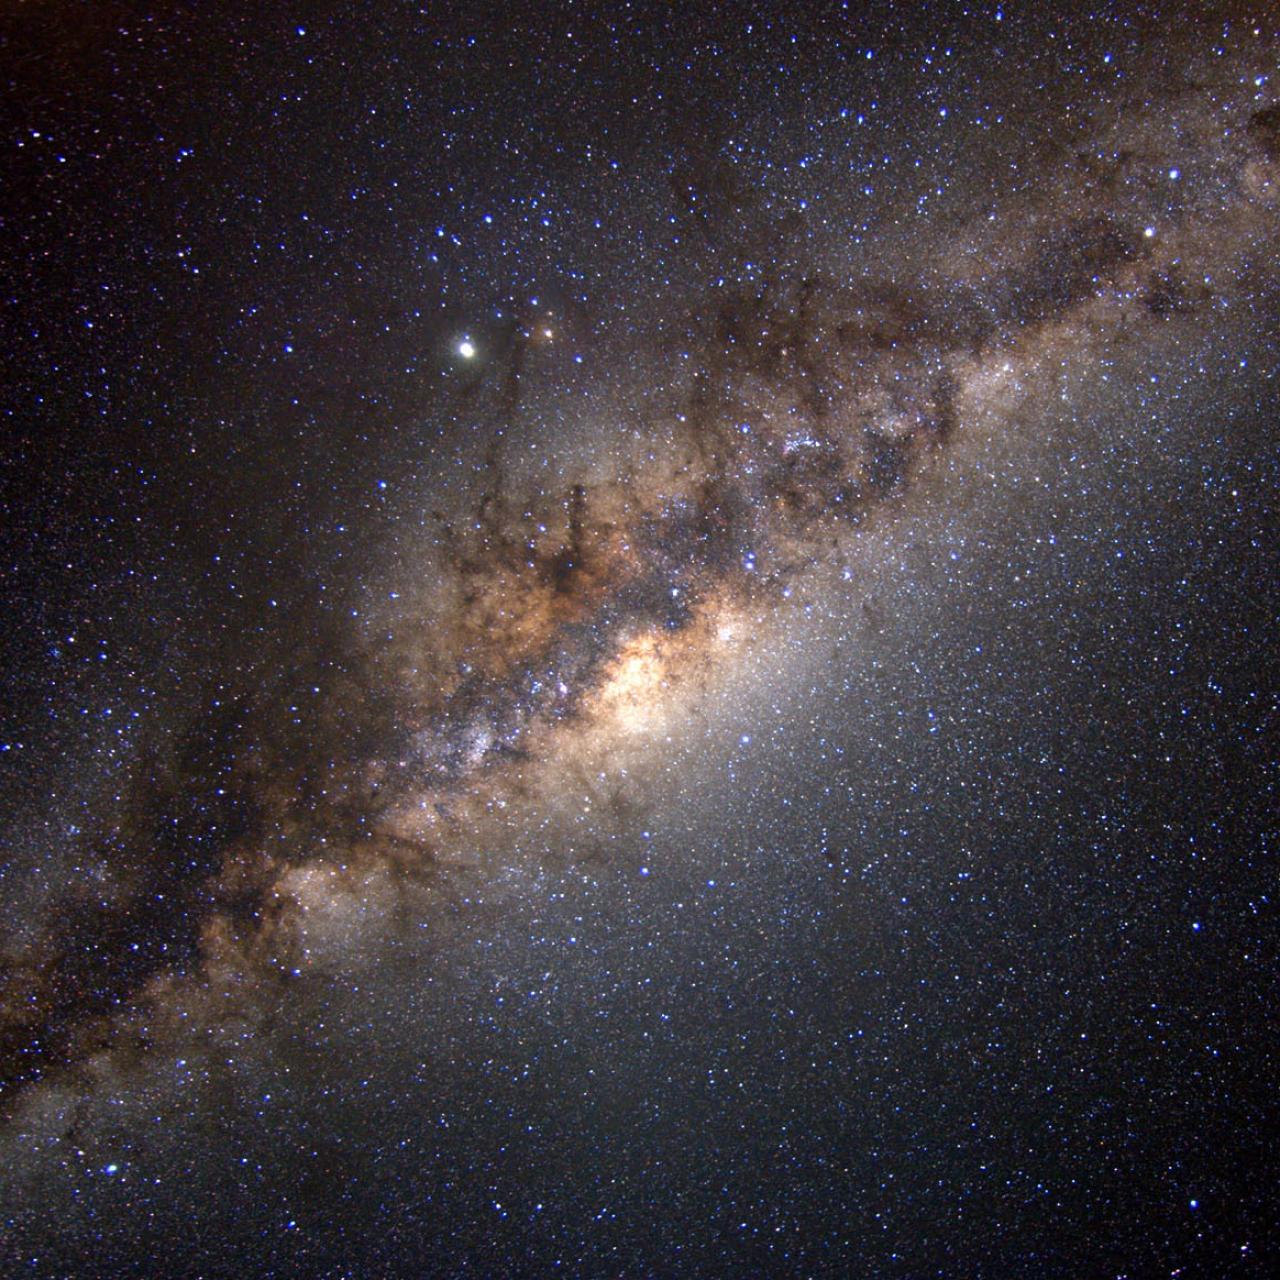 earth in the milky way